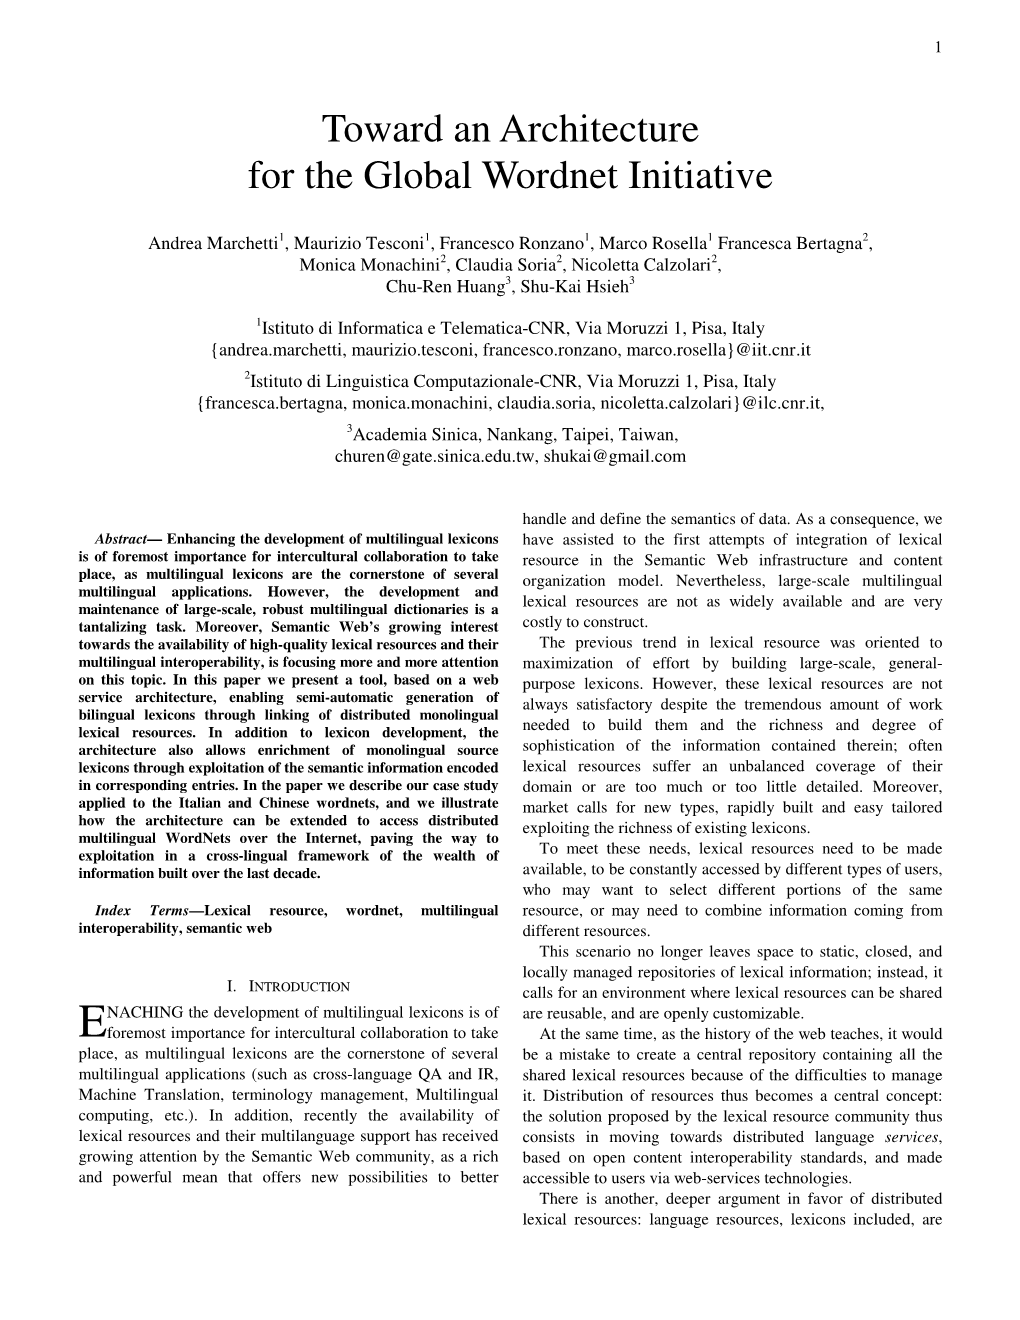 Toward an Architecture for the Global Wordnet Initiative